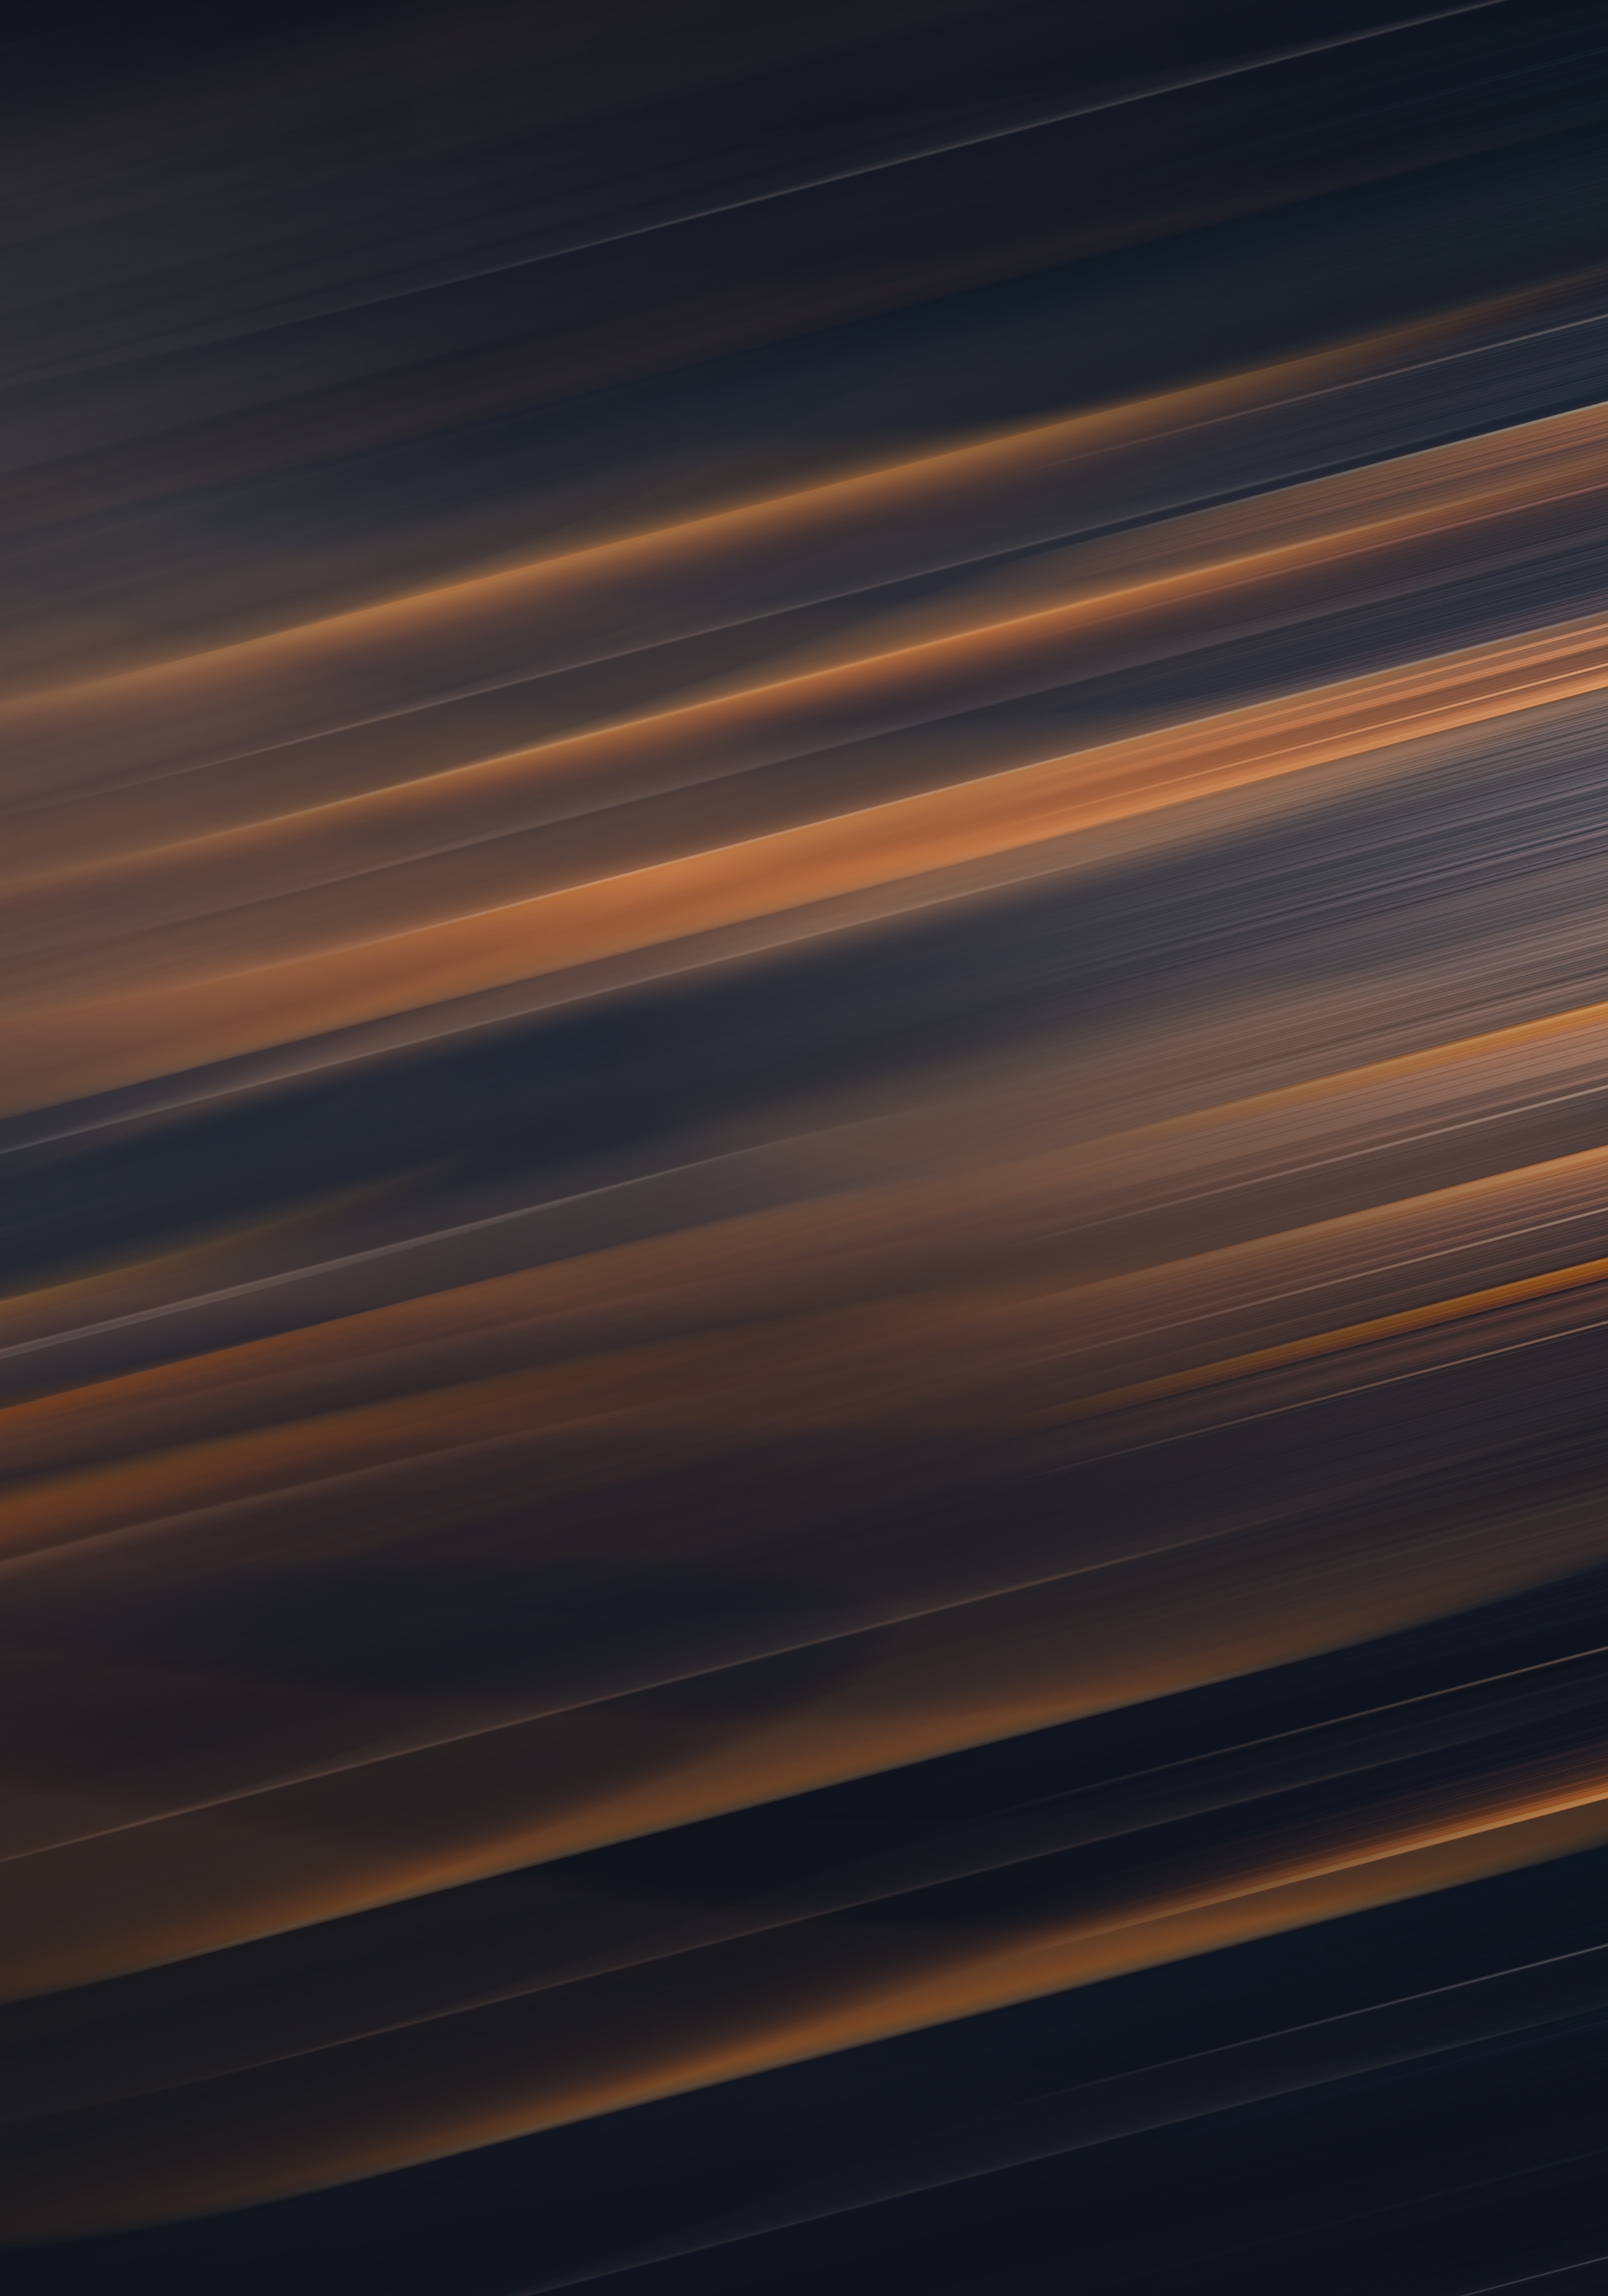 streaks, stripes, diagonal, abstract, rays, beams, lines, glow cell phone wallpapers